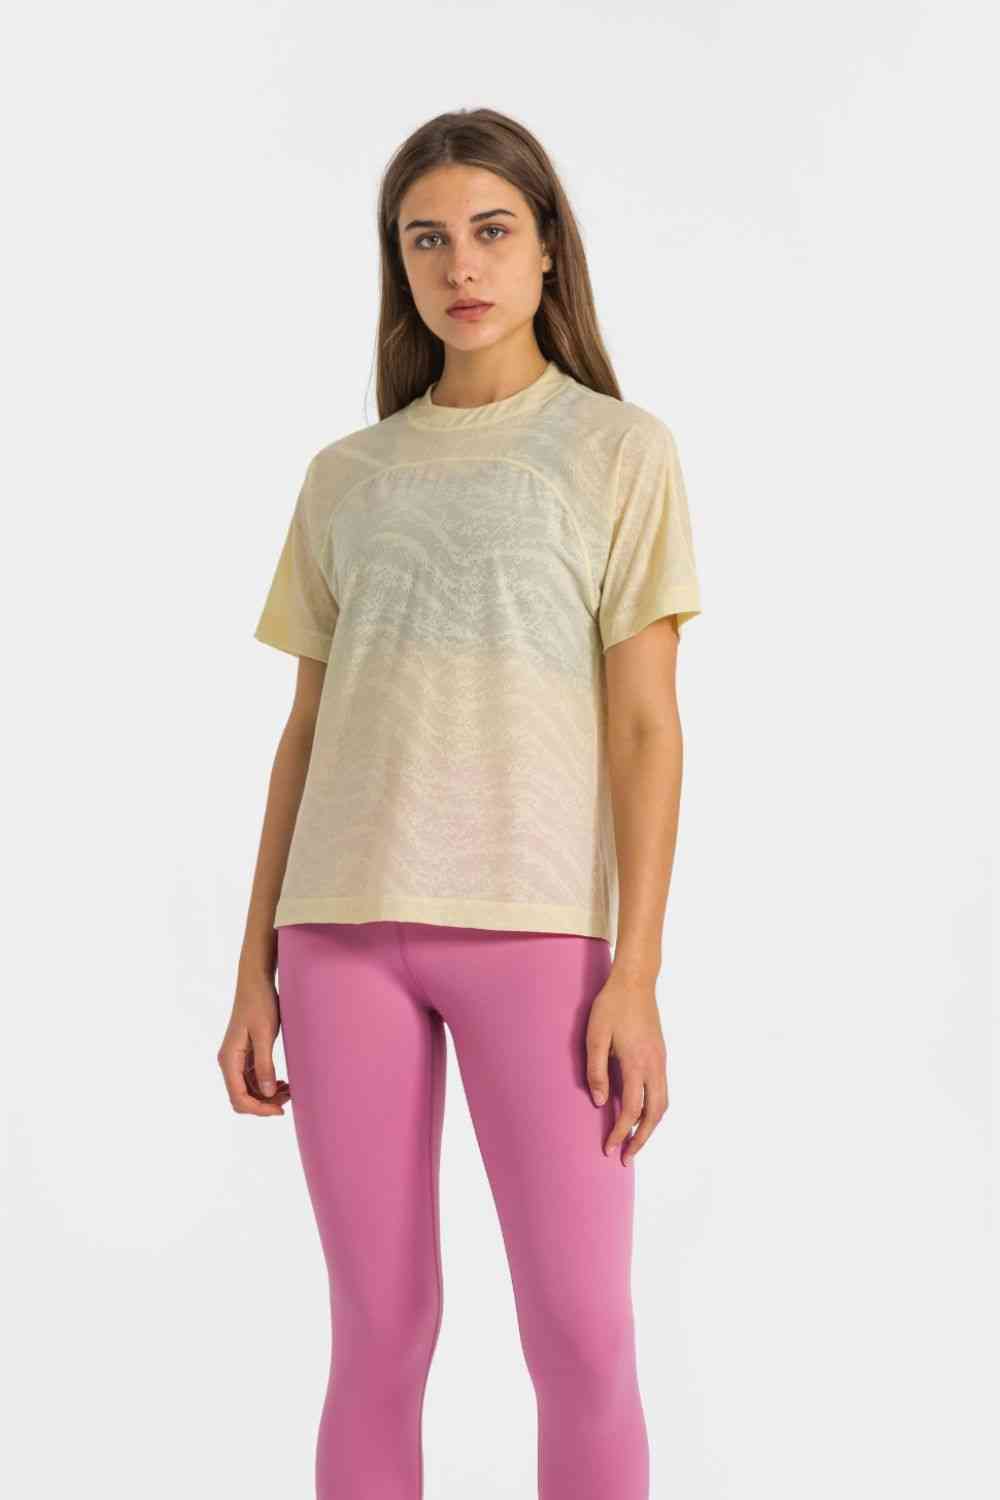 Breathable and Lightweight Short Sleeve Sports Top - Sufyaa